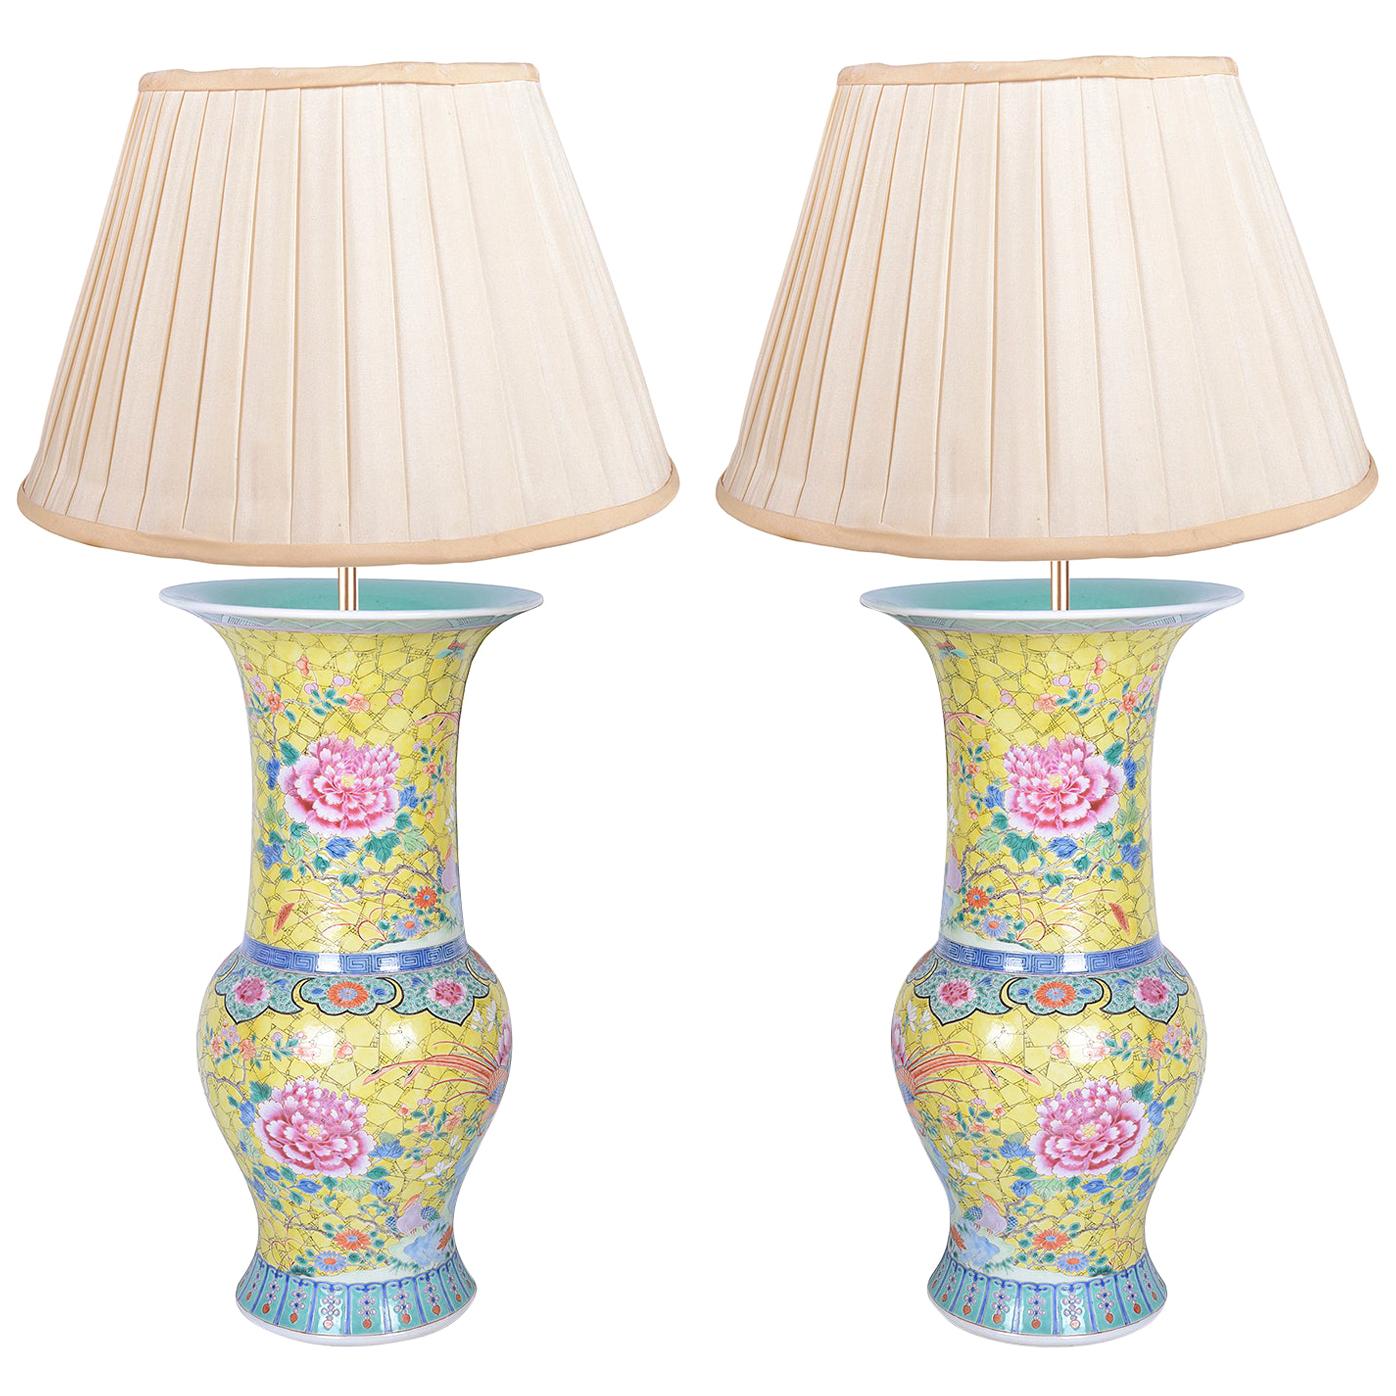 Pair of 19th Century Chinese Famille Rose Vases / Lamps